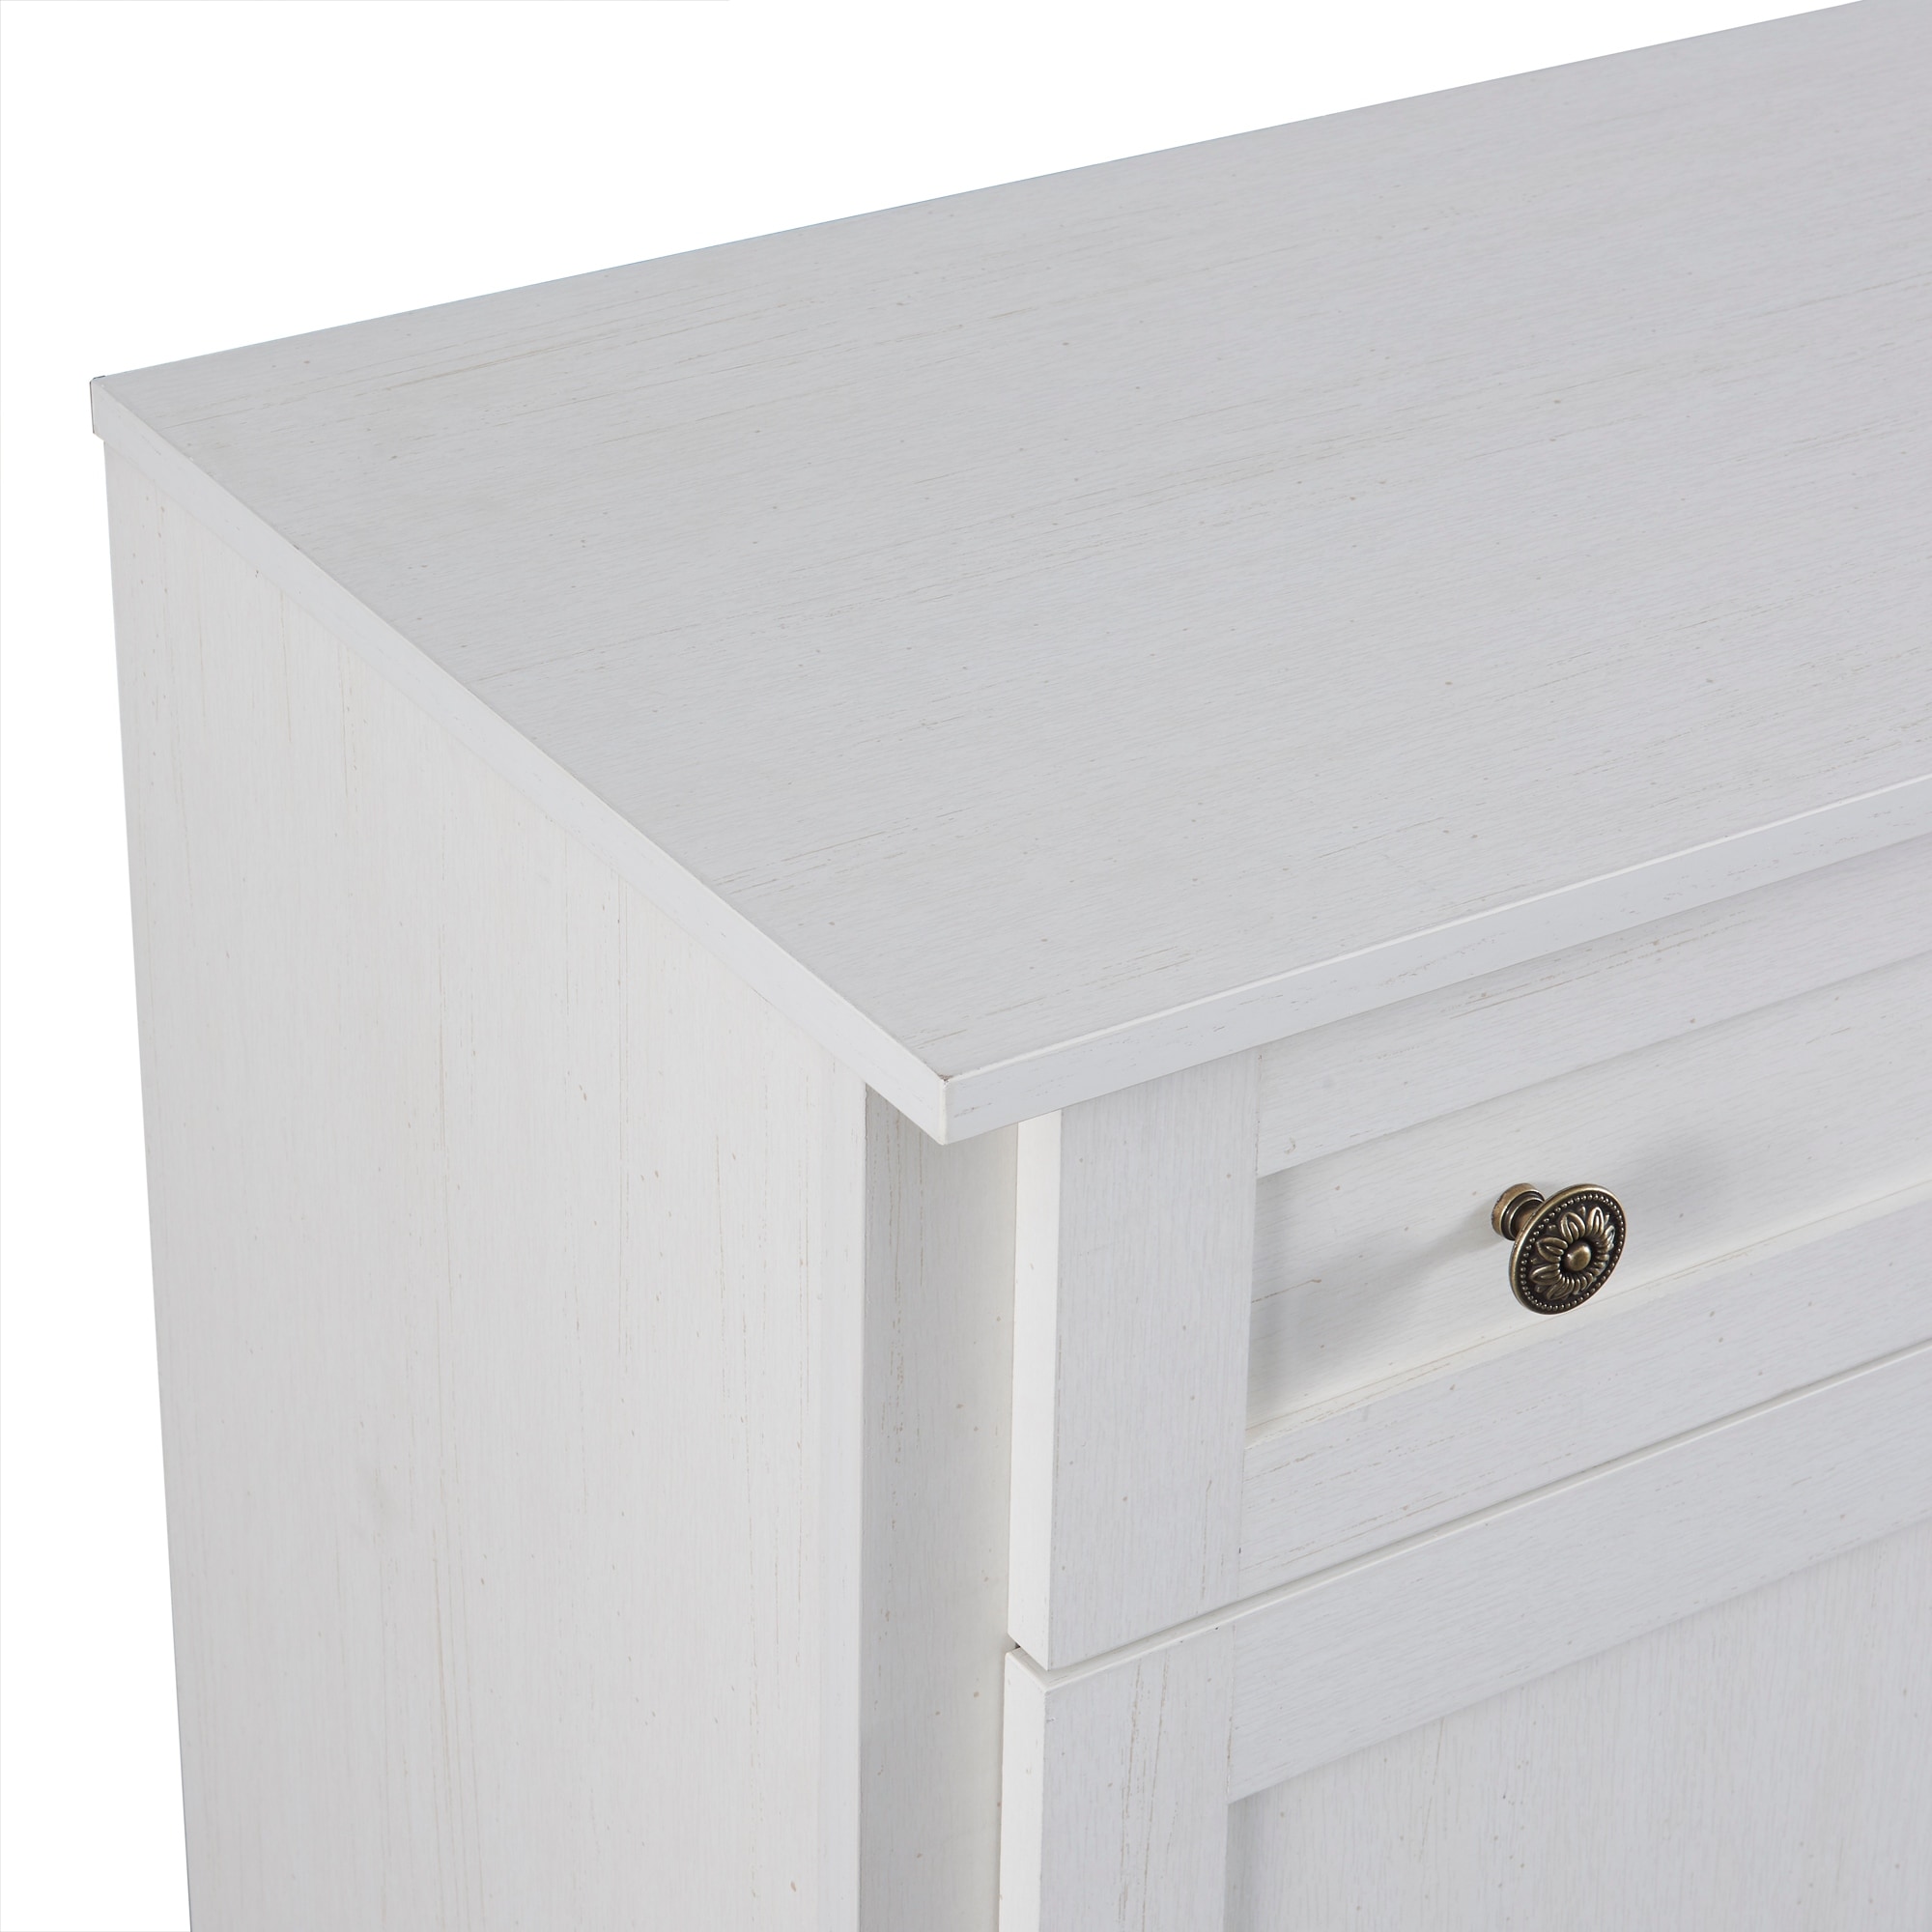 Bathroom Freestanding Wood Floor Cabinet with 2 Drawers and 1 Storage Shelf, White - ModernLuxe